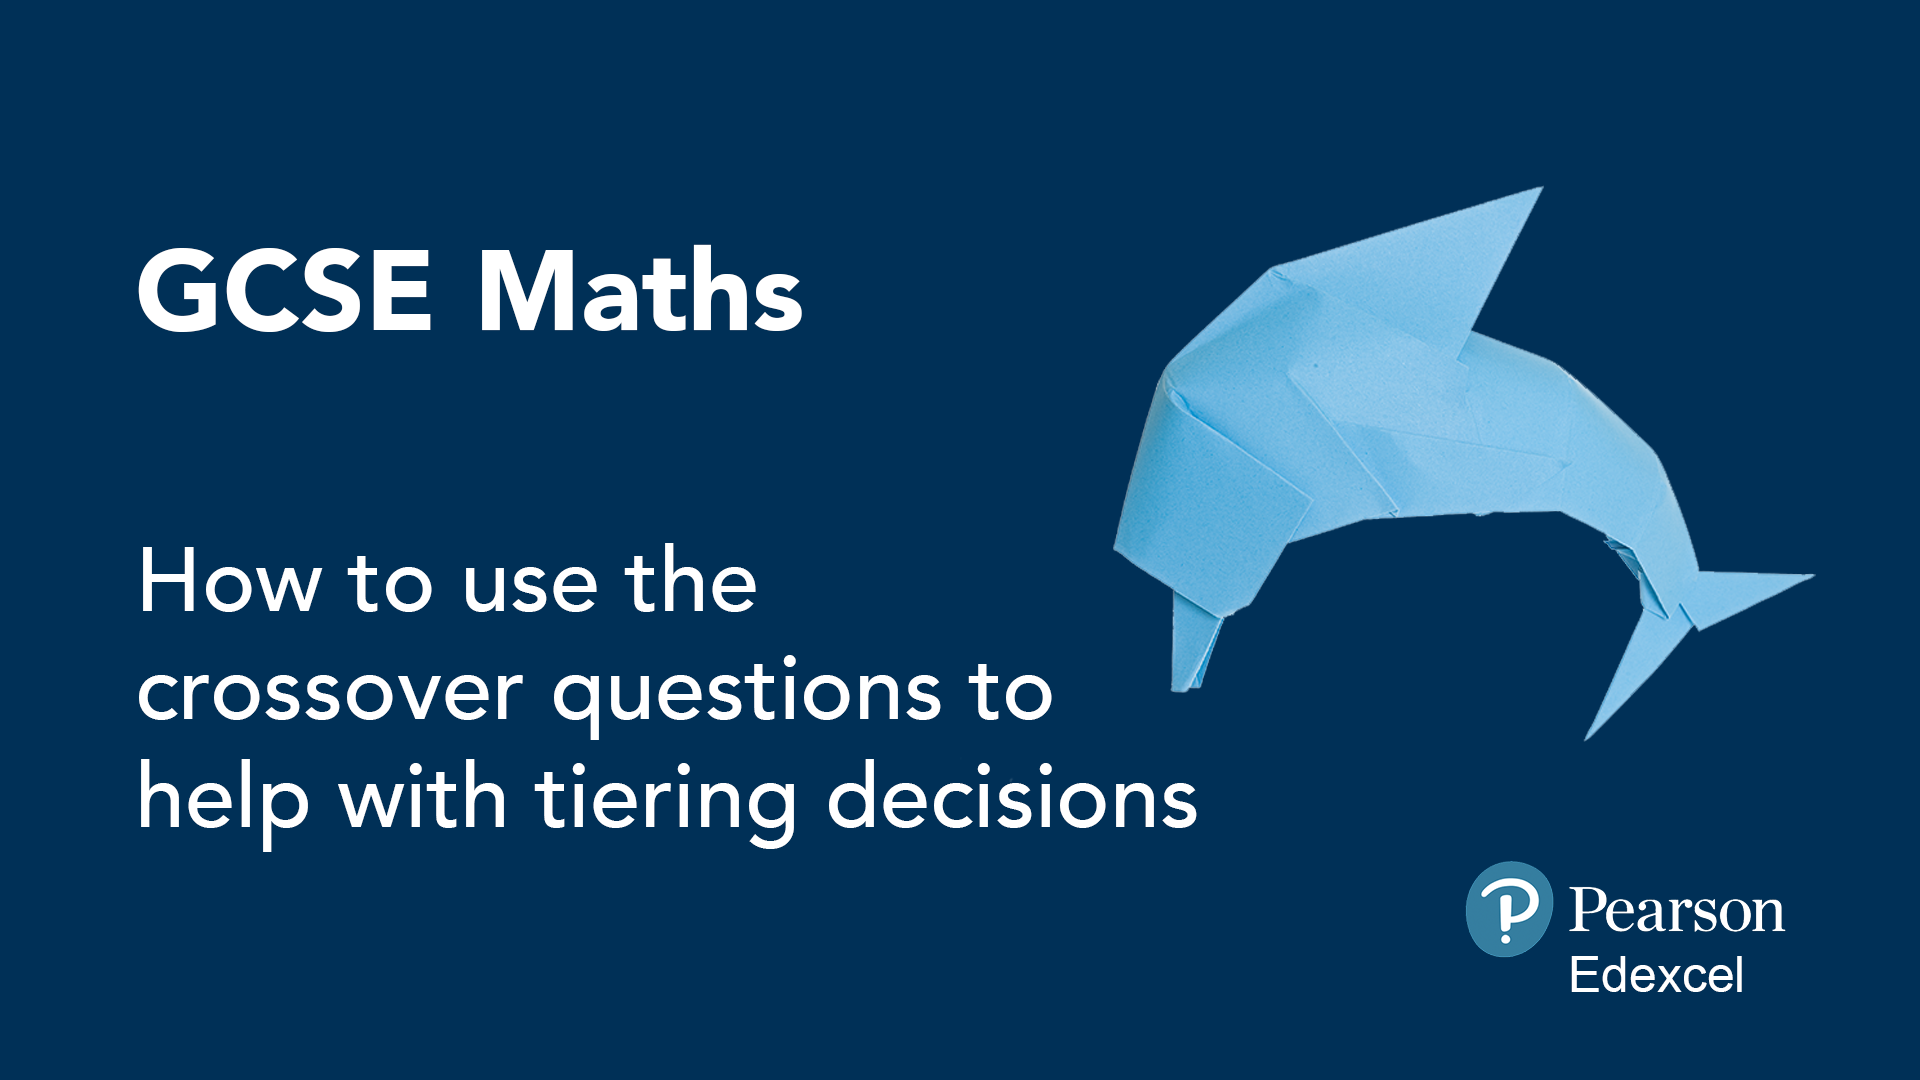 GCSE Maths: How to use the crossover questions to help with tiering decisions